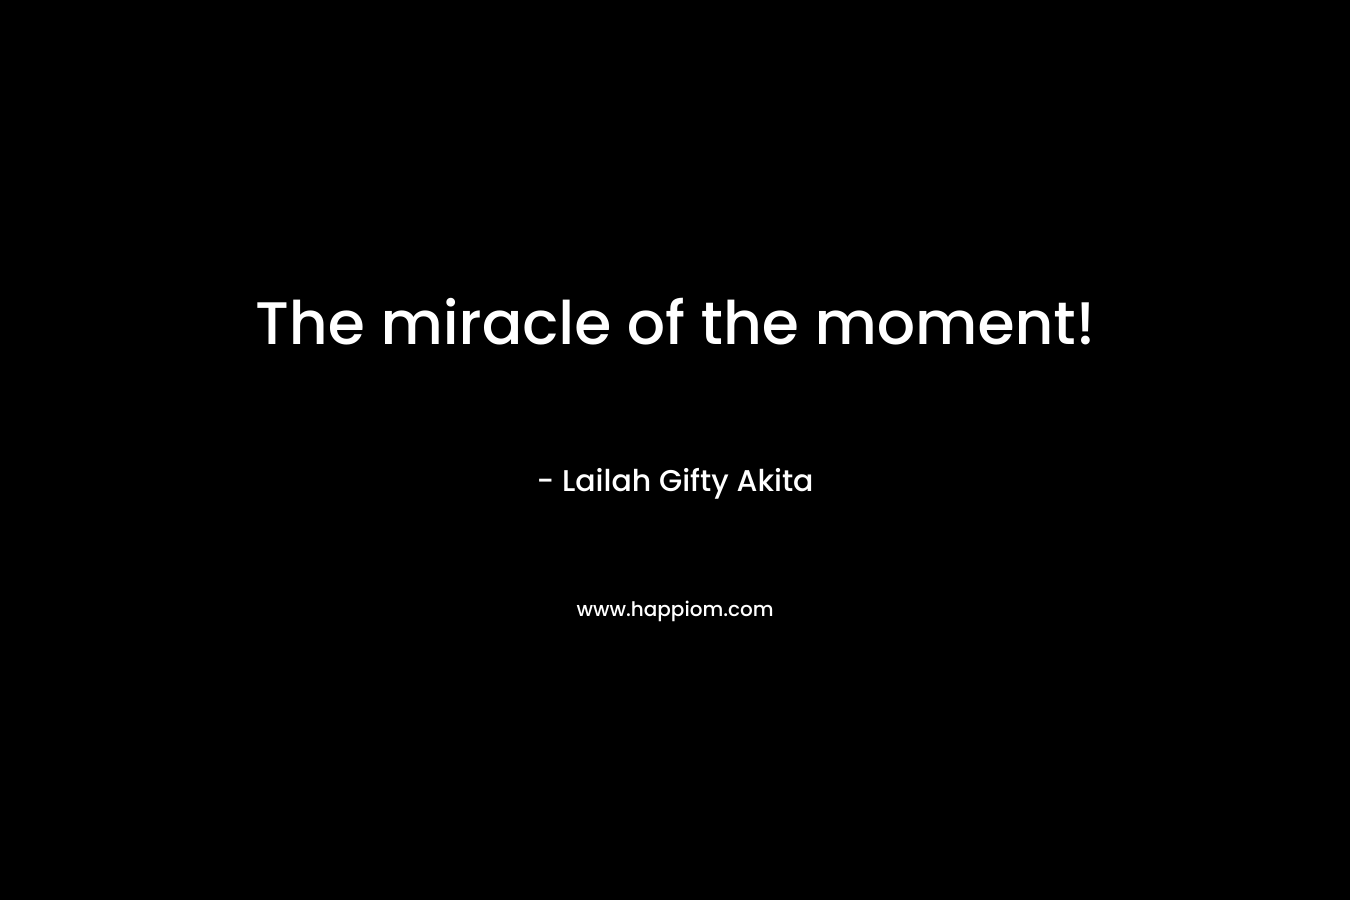 The miracle of the moment!